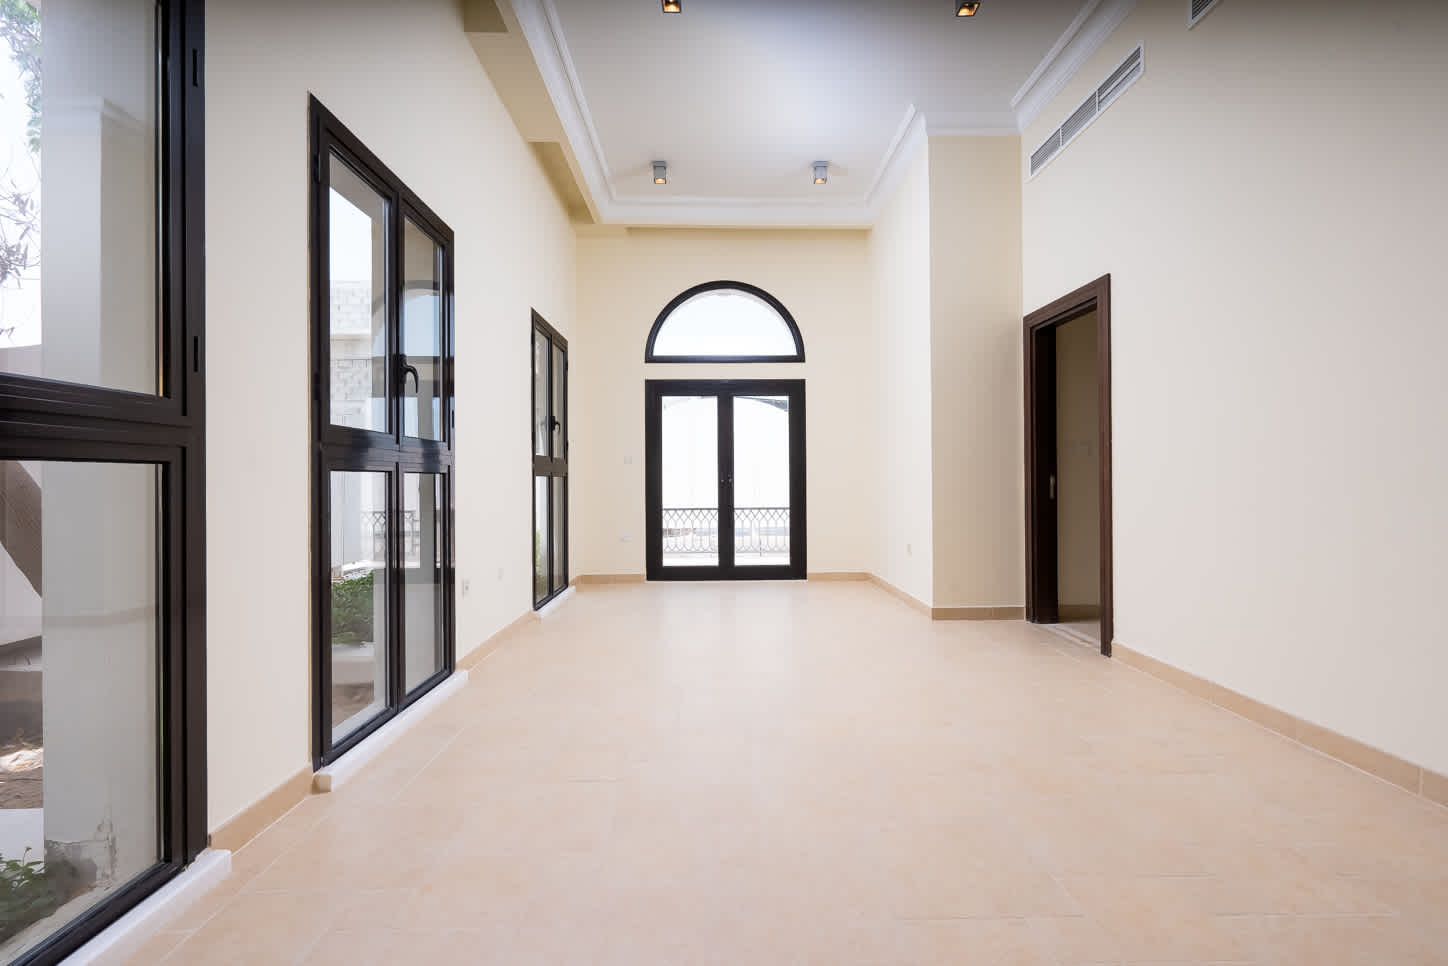 25 Spaces Real Estate - Qanat Quartier - Properties for Rent - 15th of MAY 2022 (ref THS2525)1